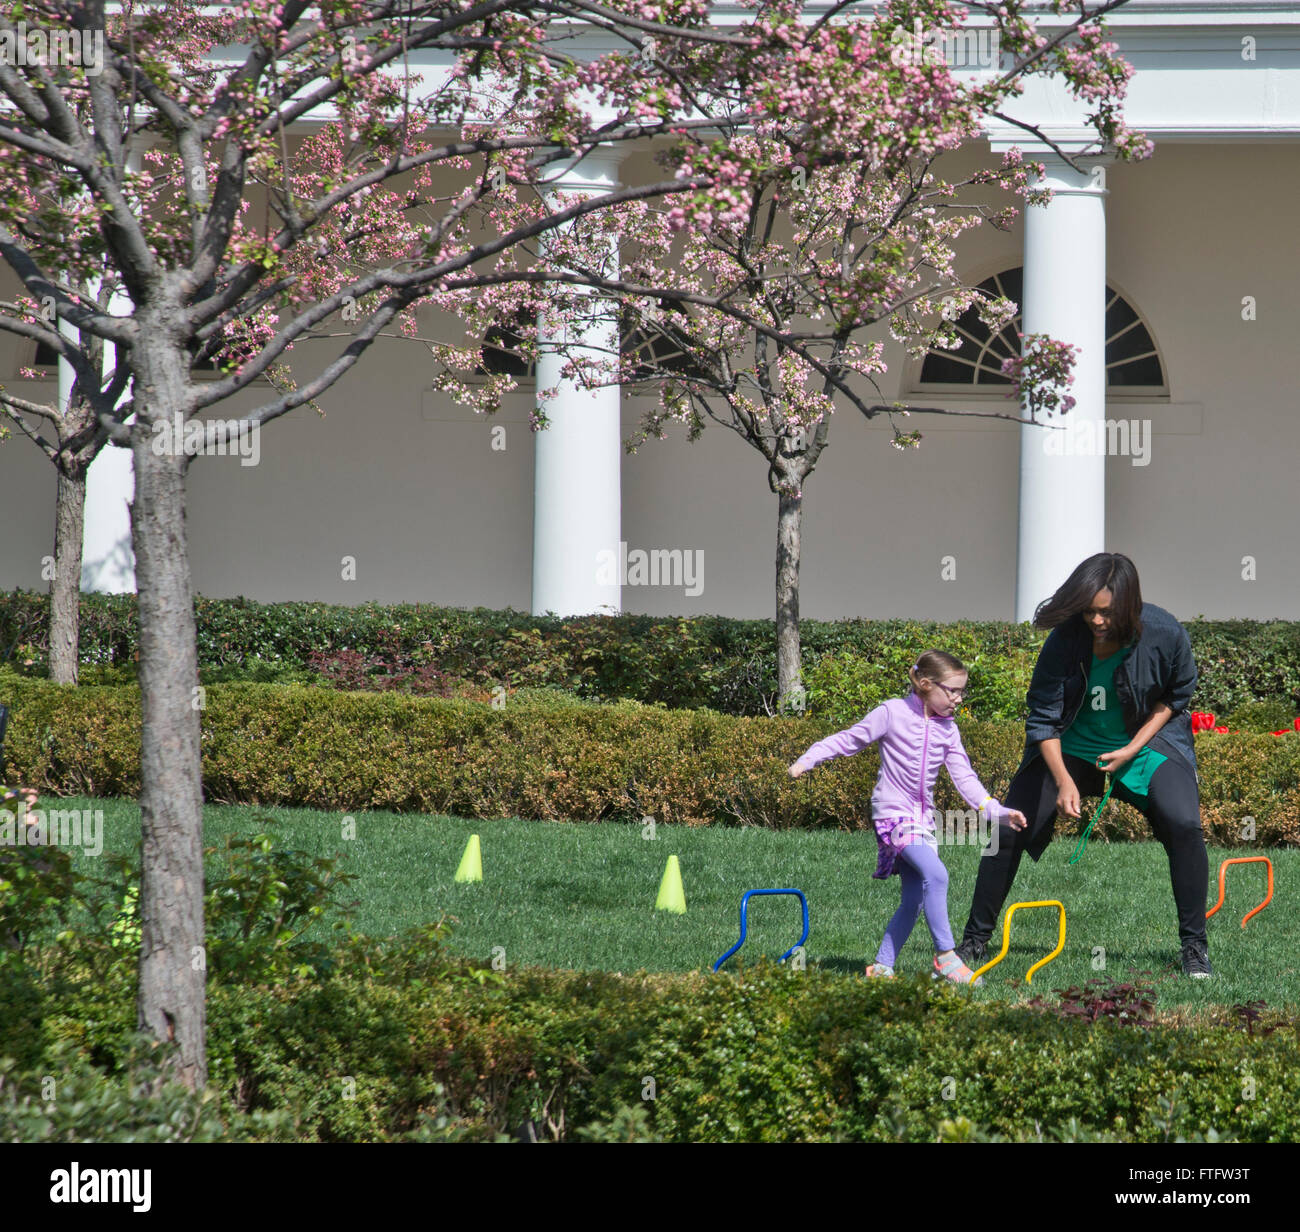 Washington DC, USA. 28th March, 2016.First Lady Michelle Obama encourages a participant in an running course in the Rose Garden during the annual White House Easter Egg roll .President Barack Obama and the First Lady were joined by thousands of people on the South Lawn of the White House. Credit:  Patsy Lynch/Alamy Live News Stock Photo